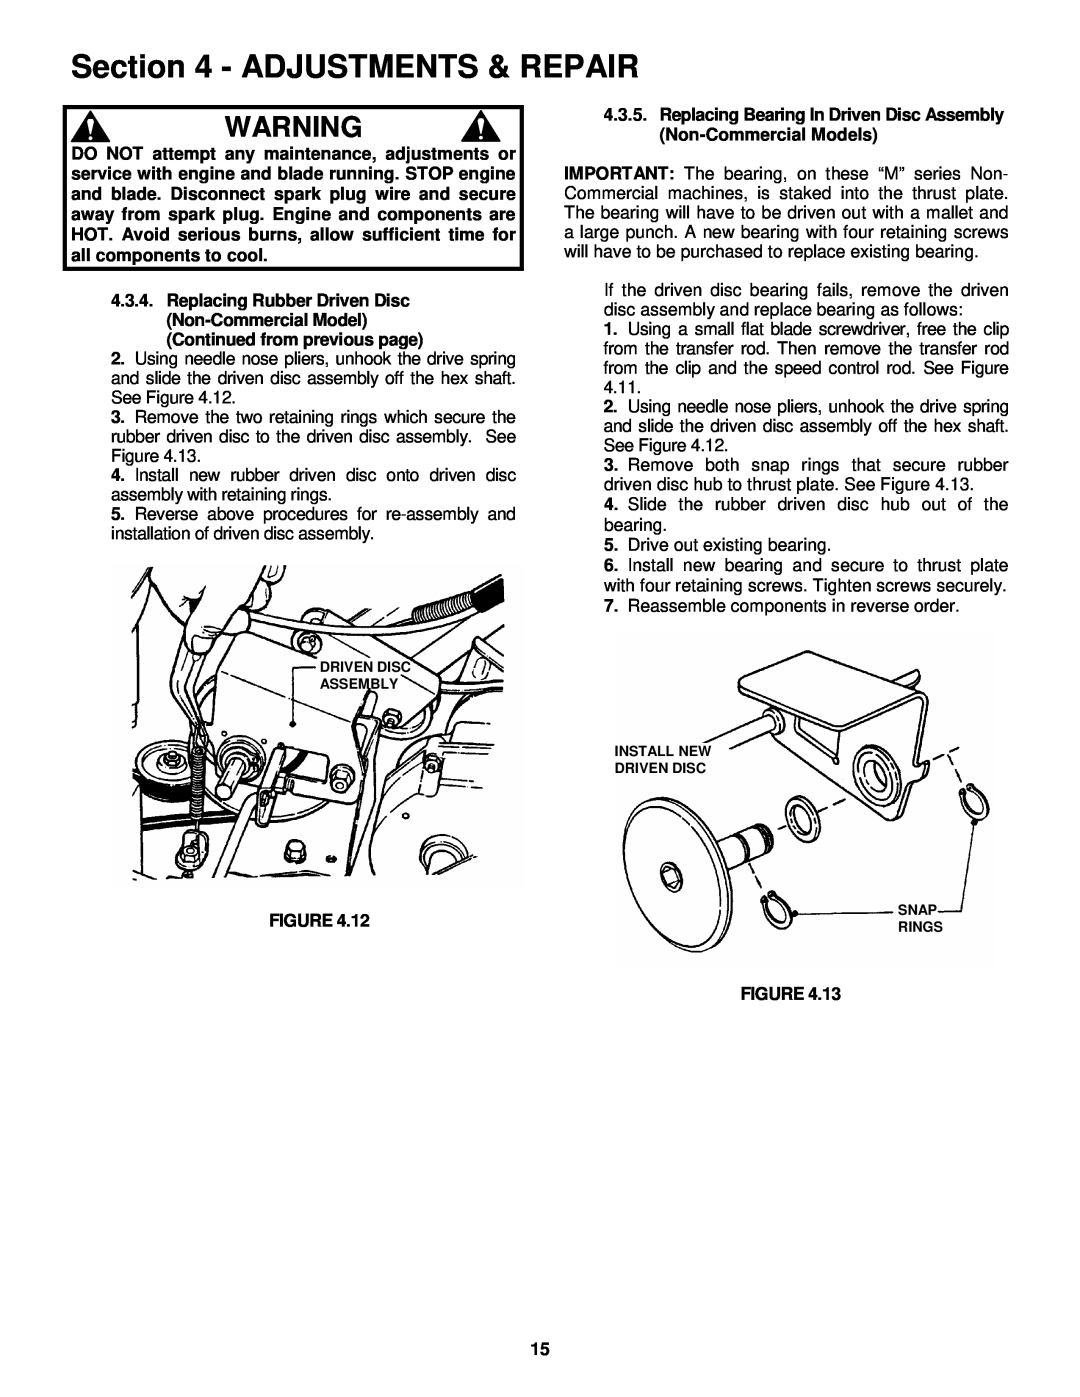 Snapper EMRP216015B important safety instructions Adjustments & Repair, Continued from previous page 